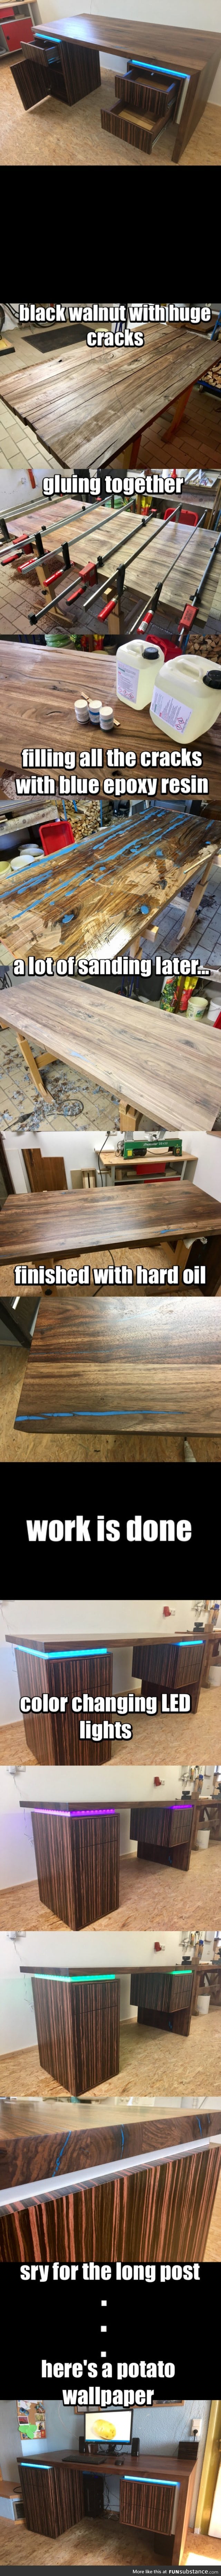 A desk made out of black walnut with blue epoxy inlay